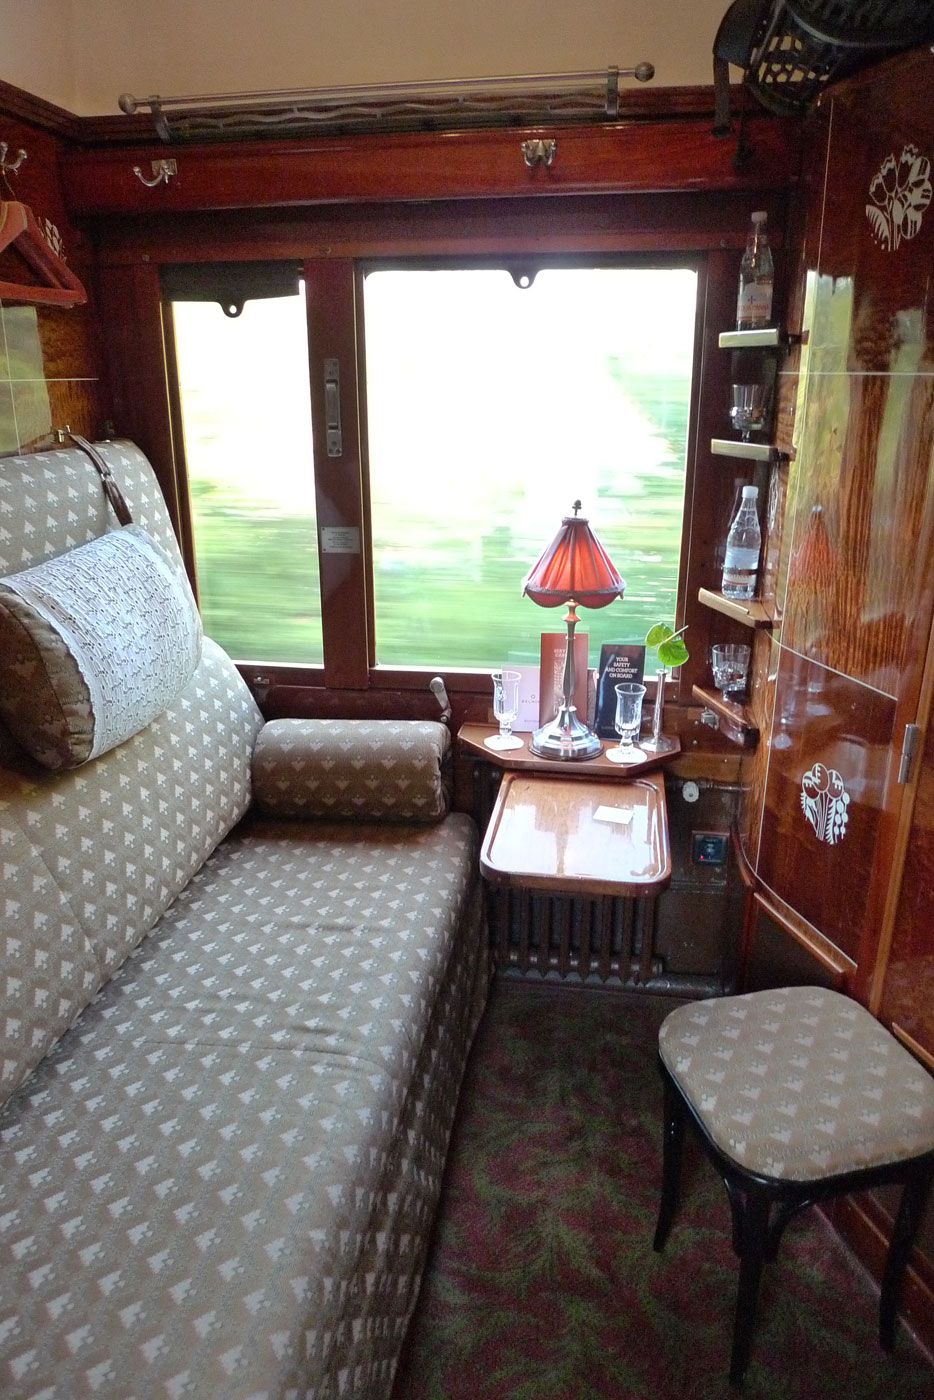 The Venice Simplon-Orient-Express: See Inside Europe's Most Swoon-Worthy  Sleeper Train Yet